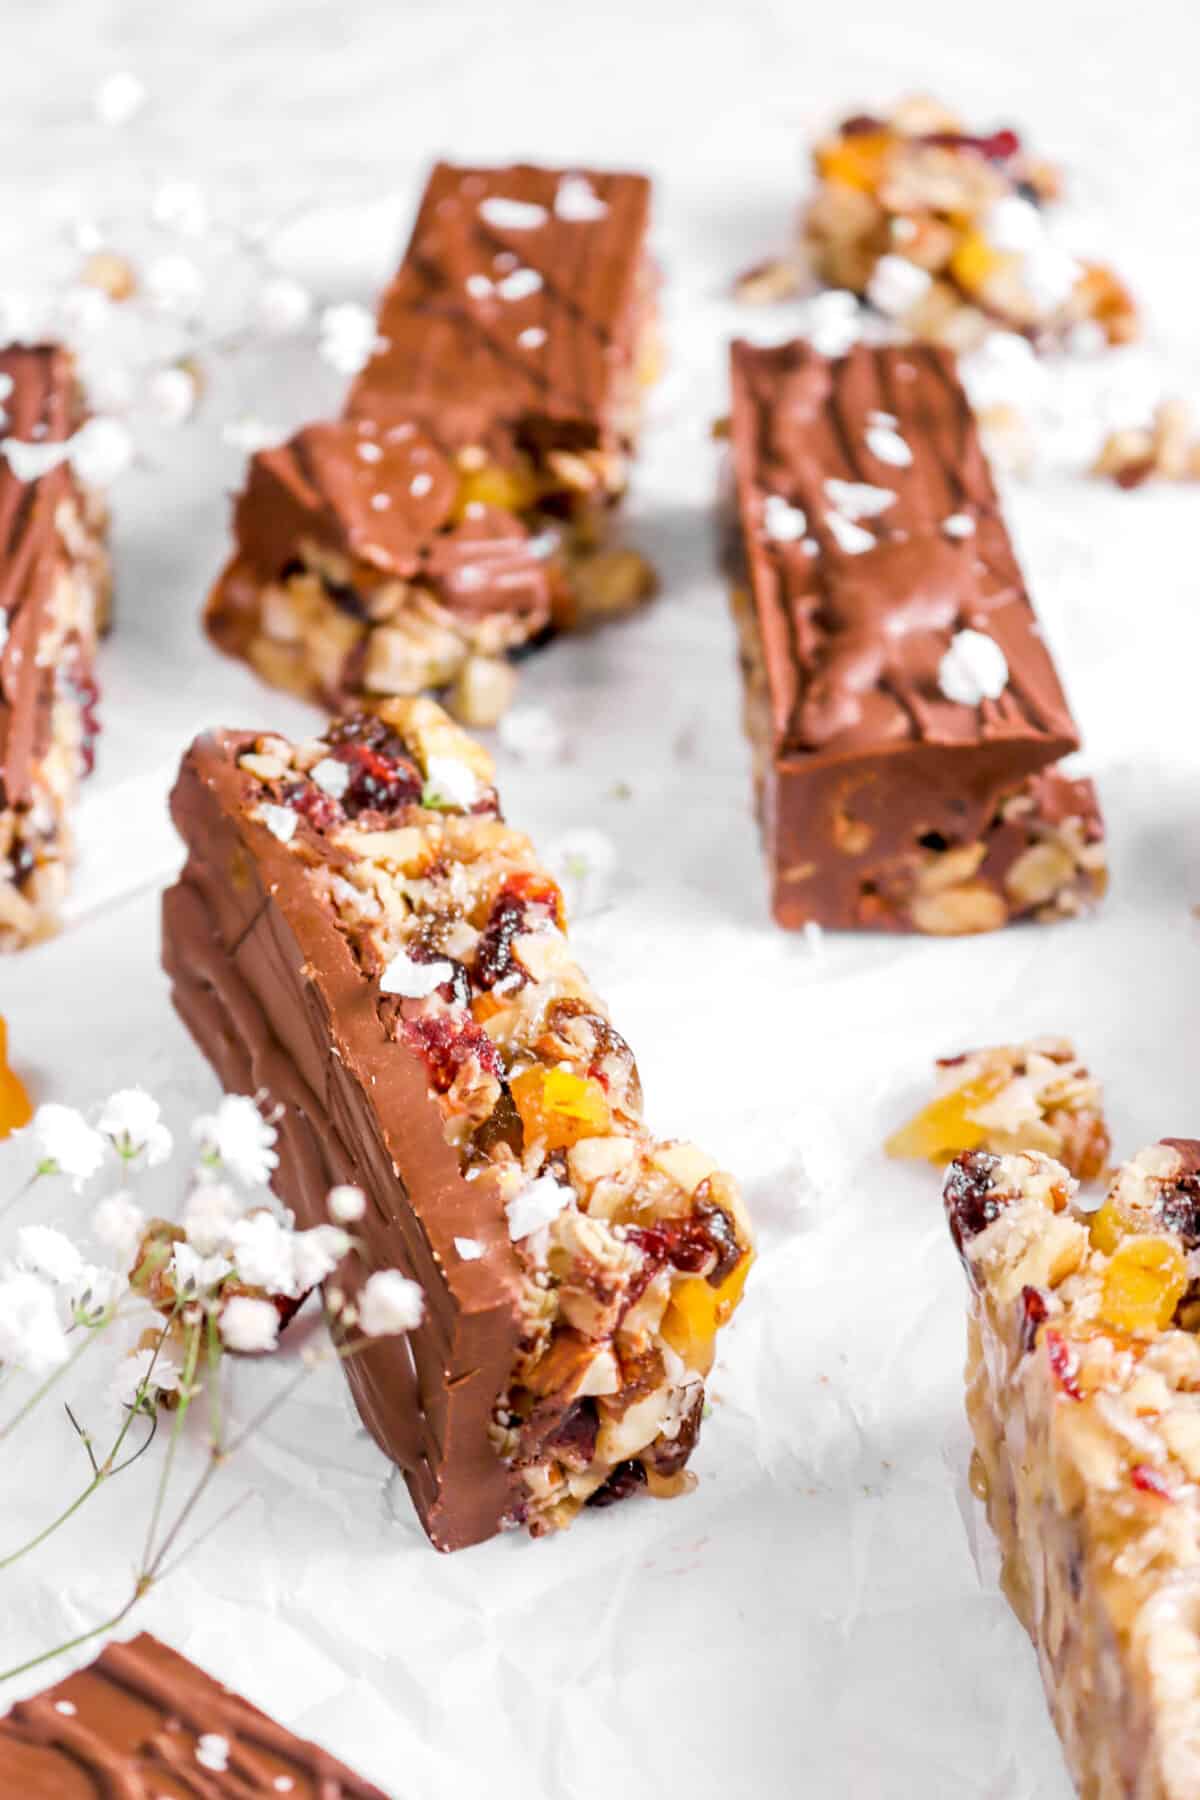 granola bar on its side on parchment paper with flowers and four granola bars around it